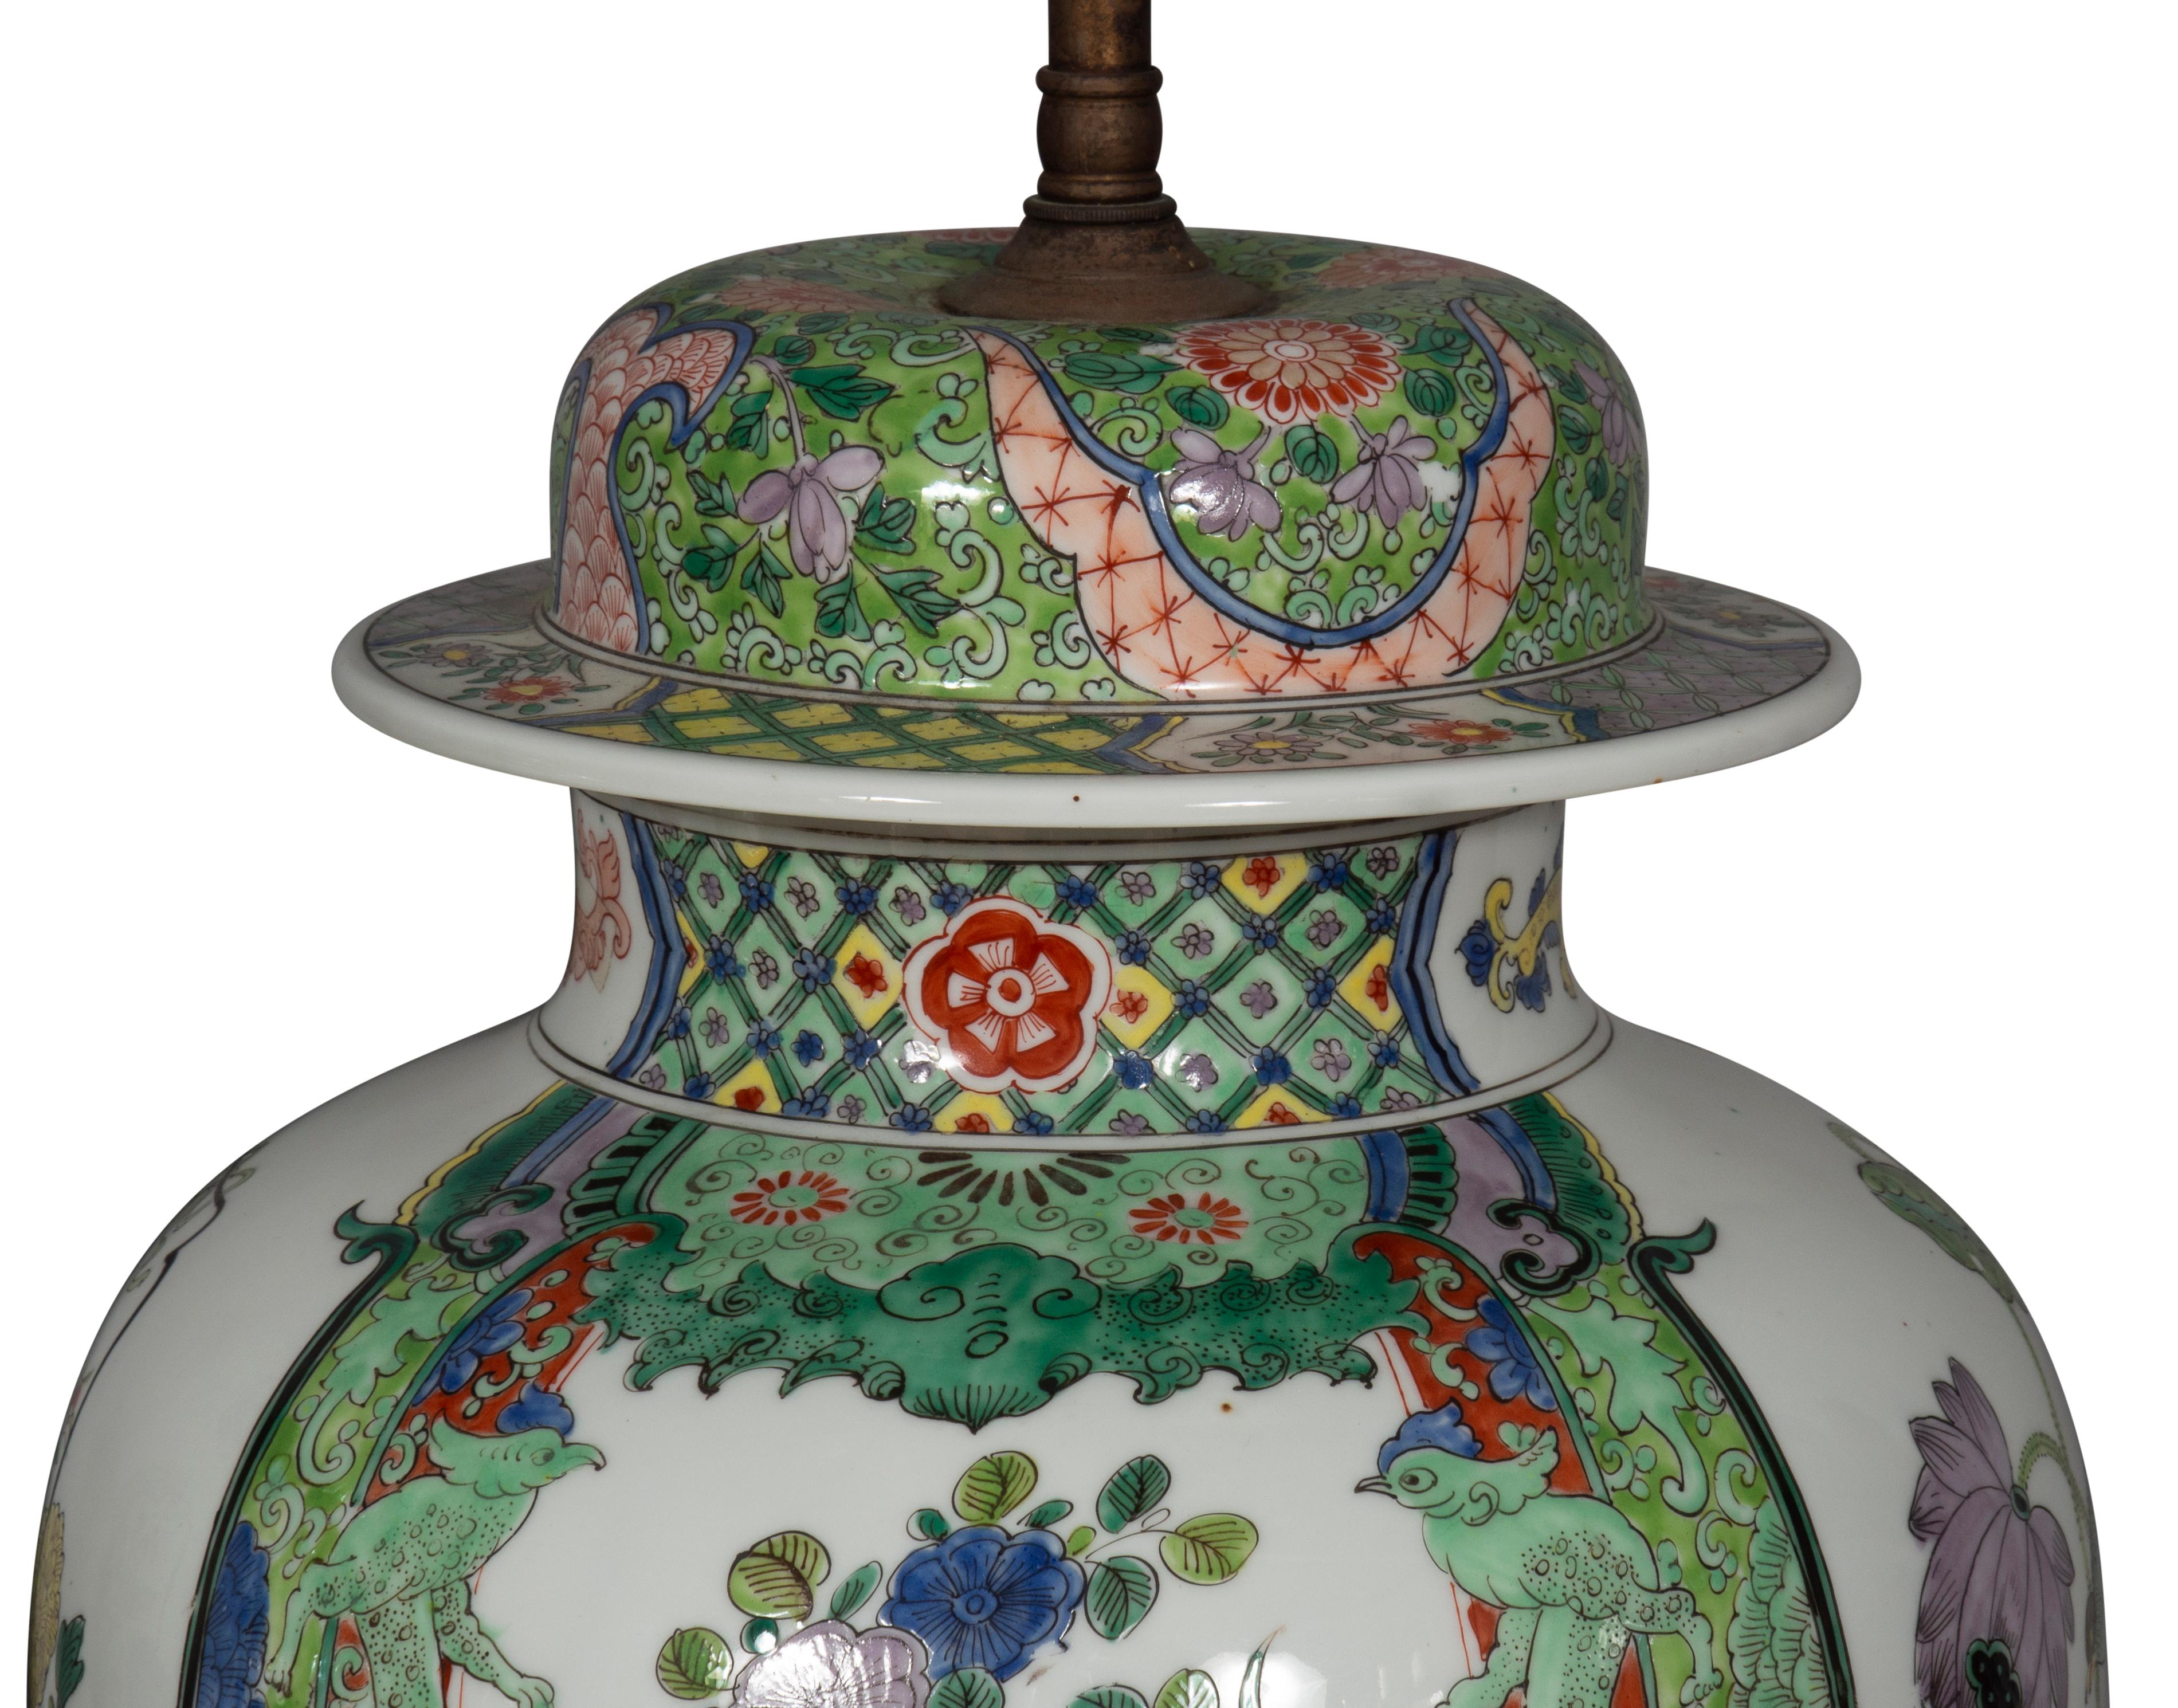 Pair of Samson Porcelain Ginger Jar Table Lamps in the Chinese Export Style For Sale 6